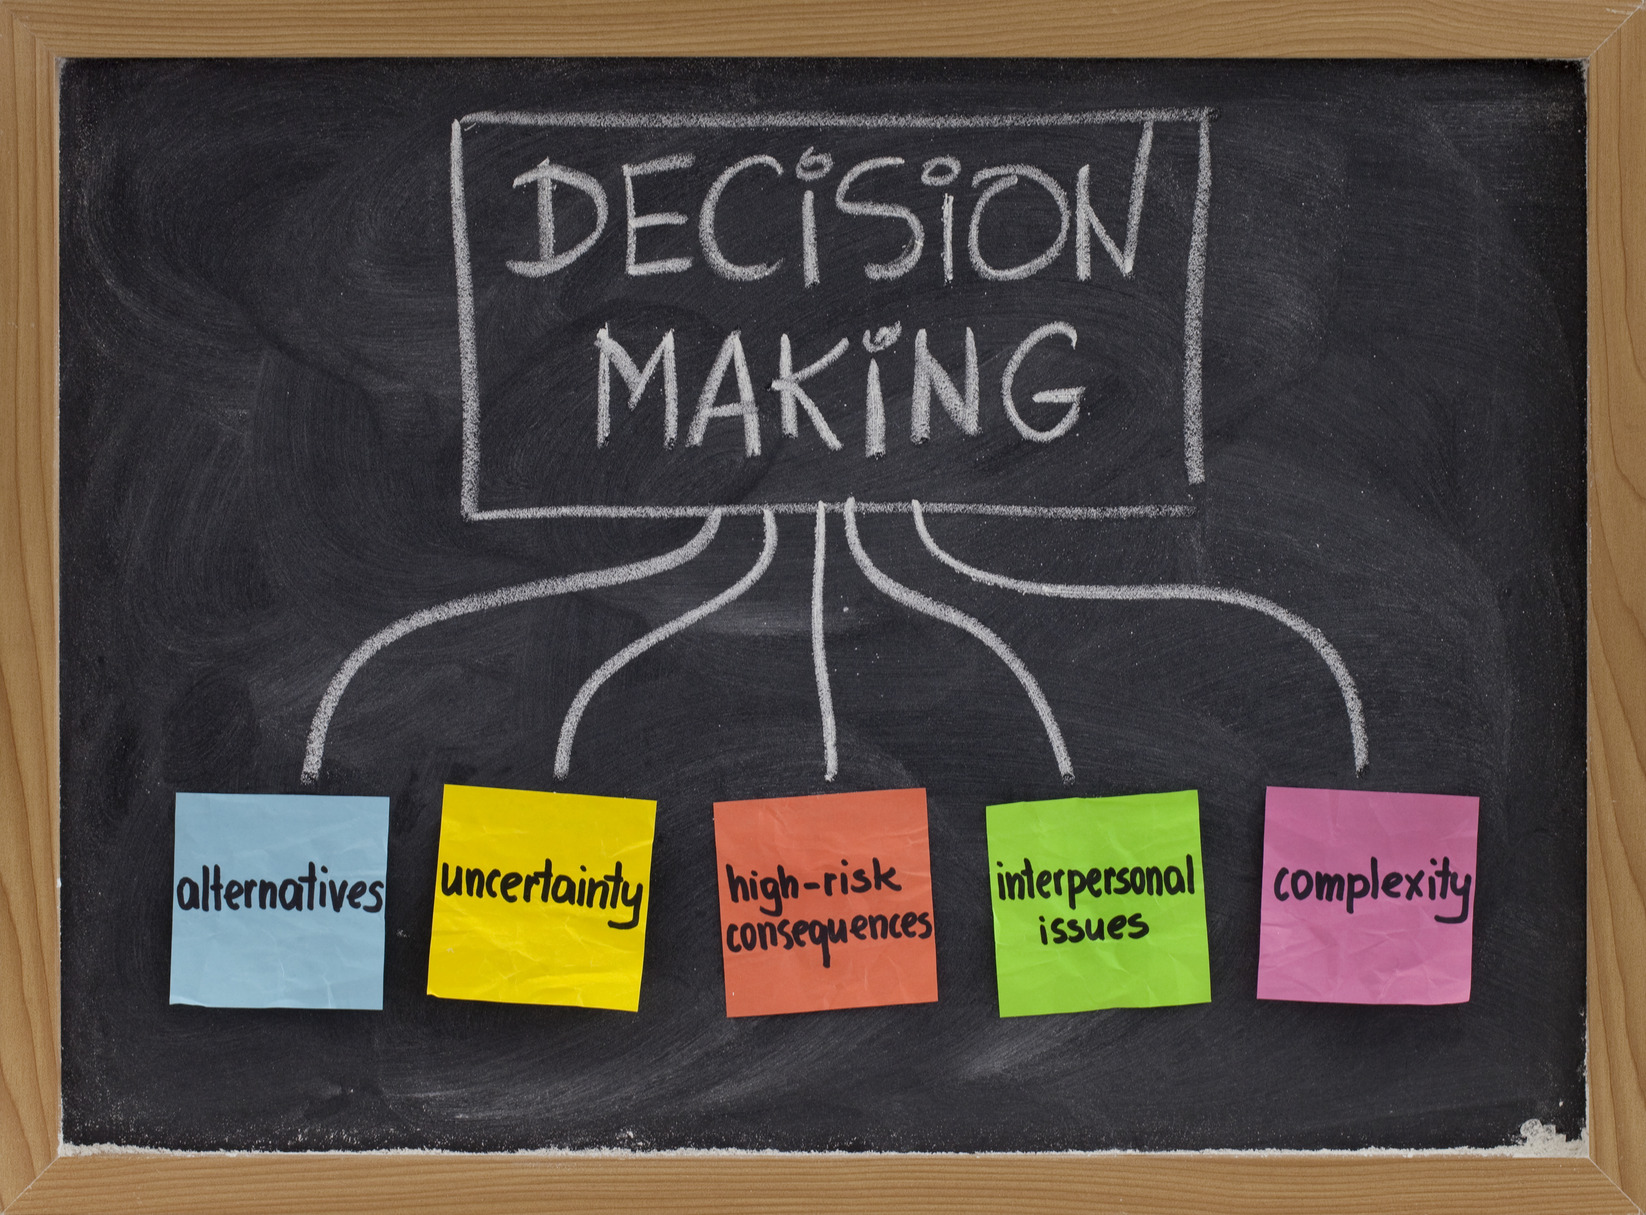 Online Shopping And Decision Making Do We Make Our Own Decisions